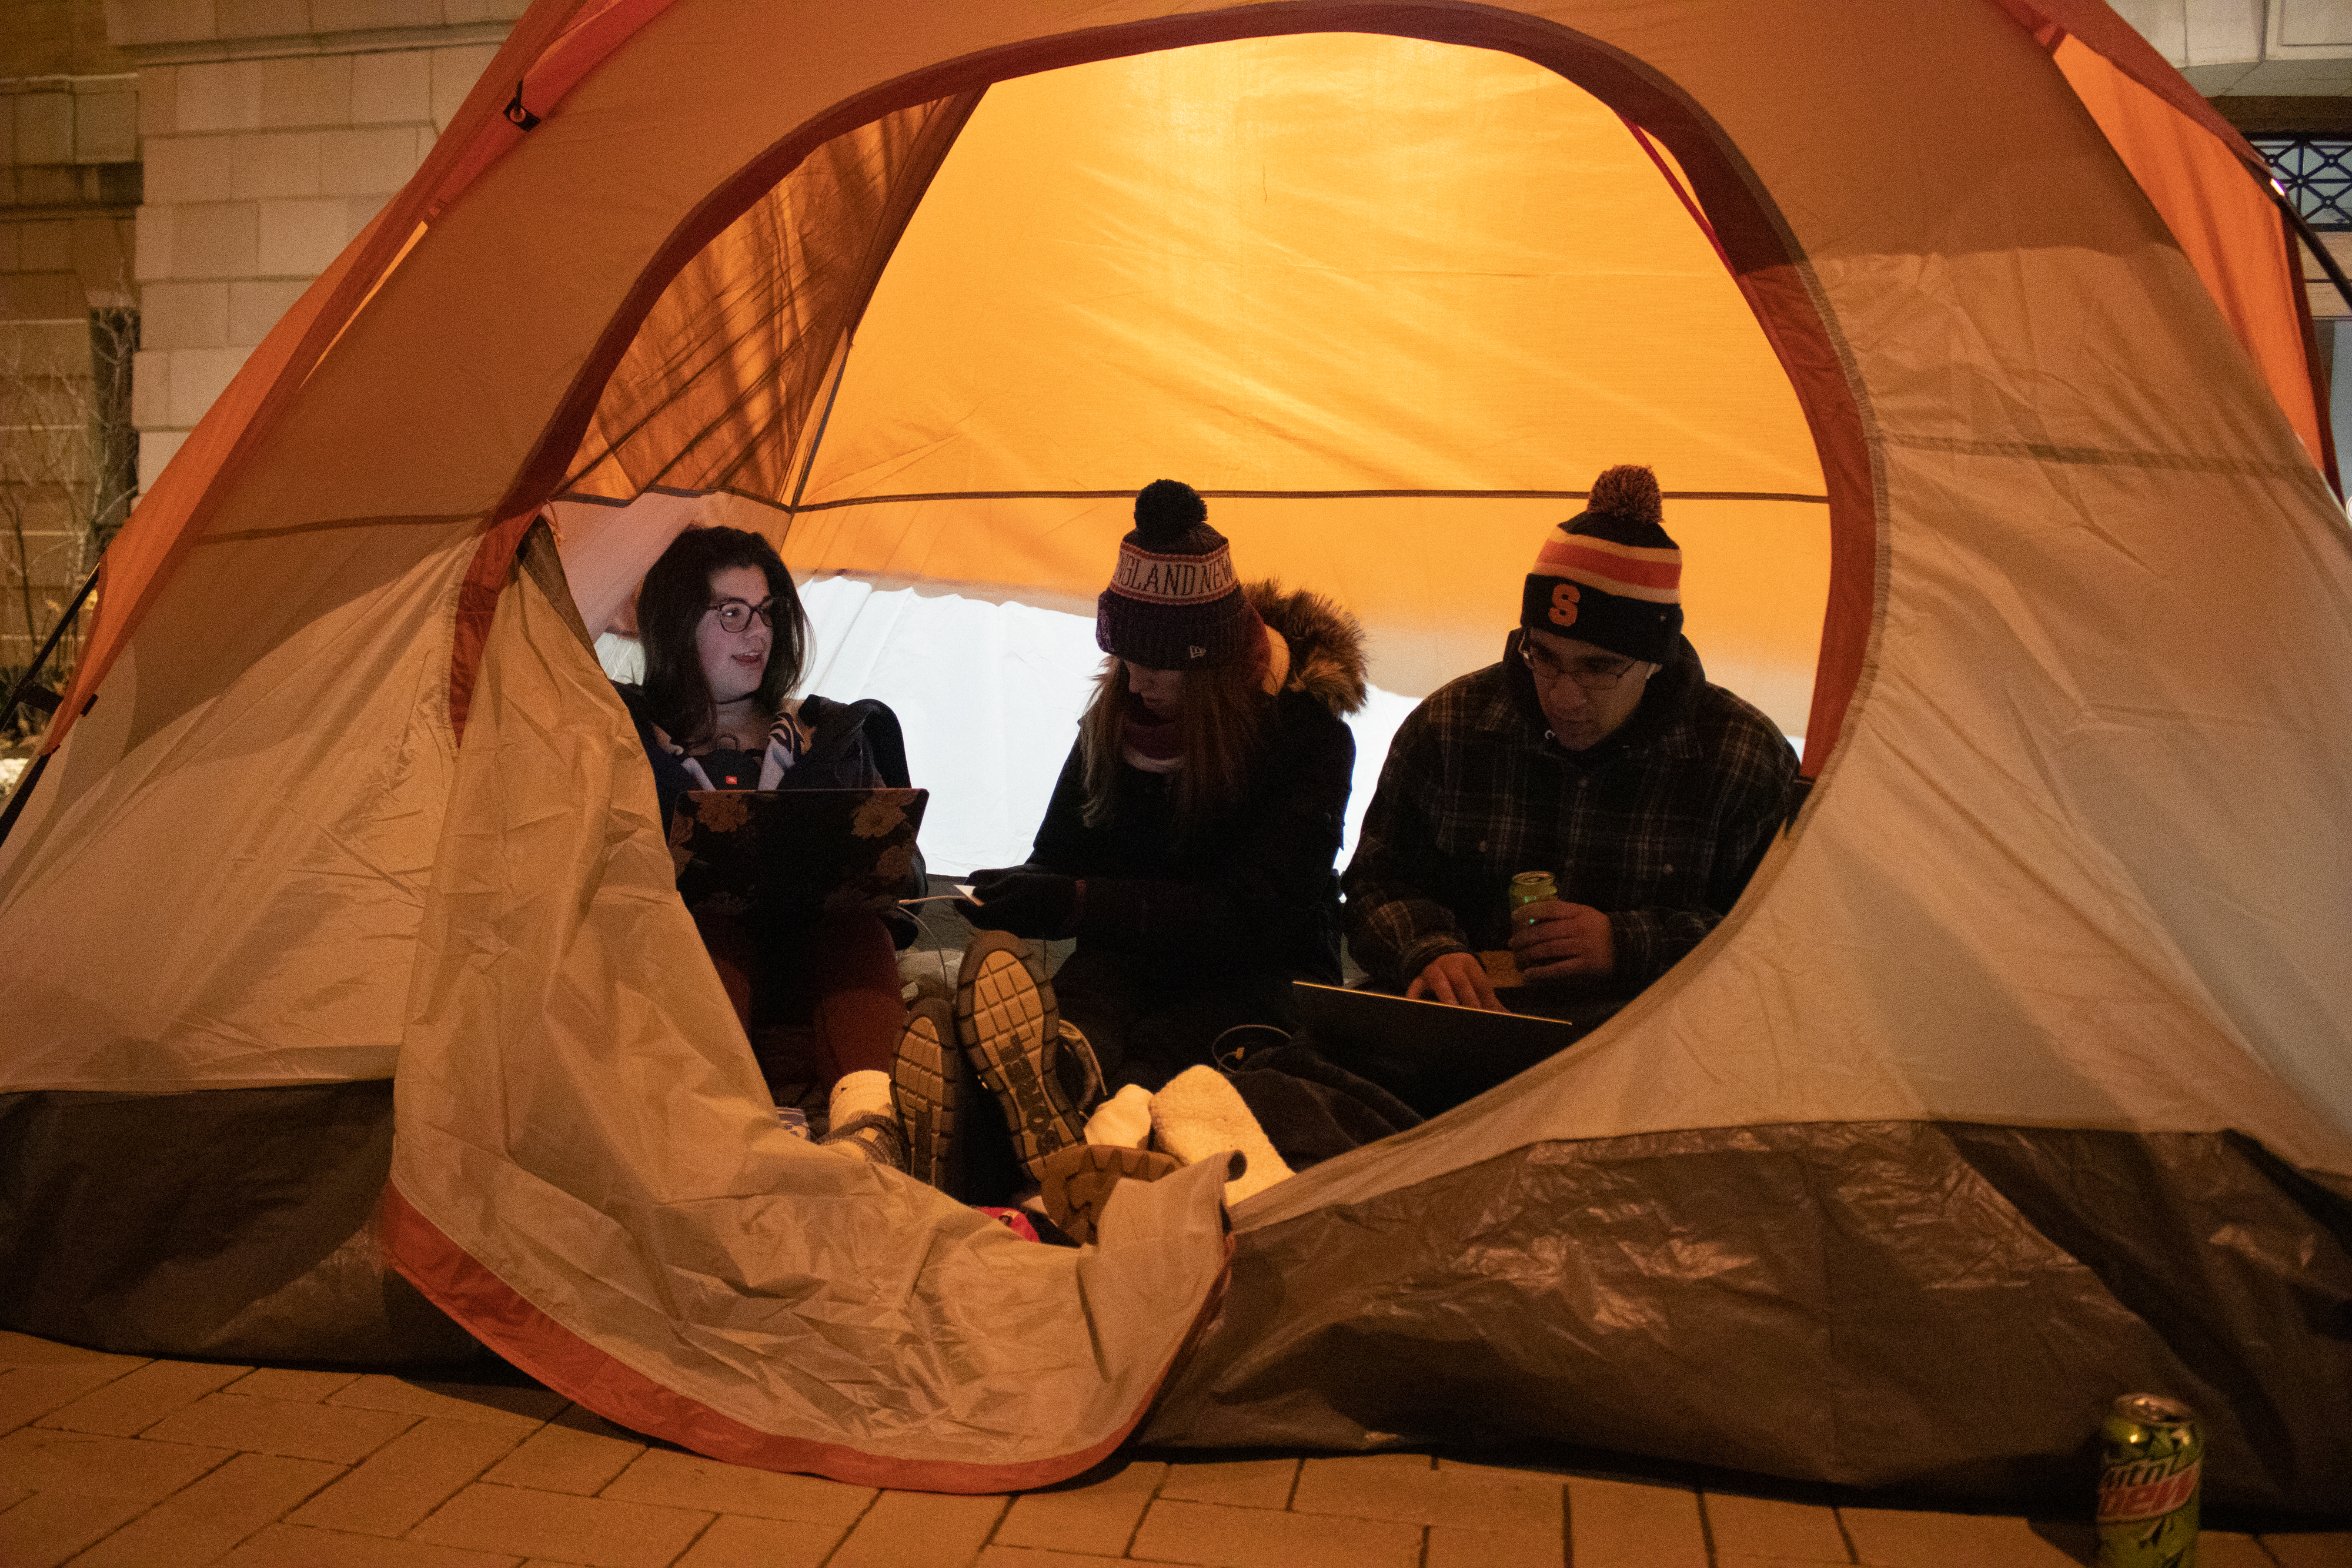 Syracuse freshmen Emma Sheridan, Anna Blackwood, and Chris Bezdedeanu work on homework in their tent during the Carrier Dome Camp Out before the Syracuse Men's basketball game against Duke on the night of January 31, 2020.